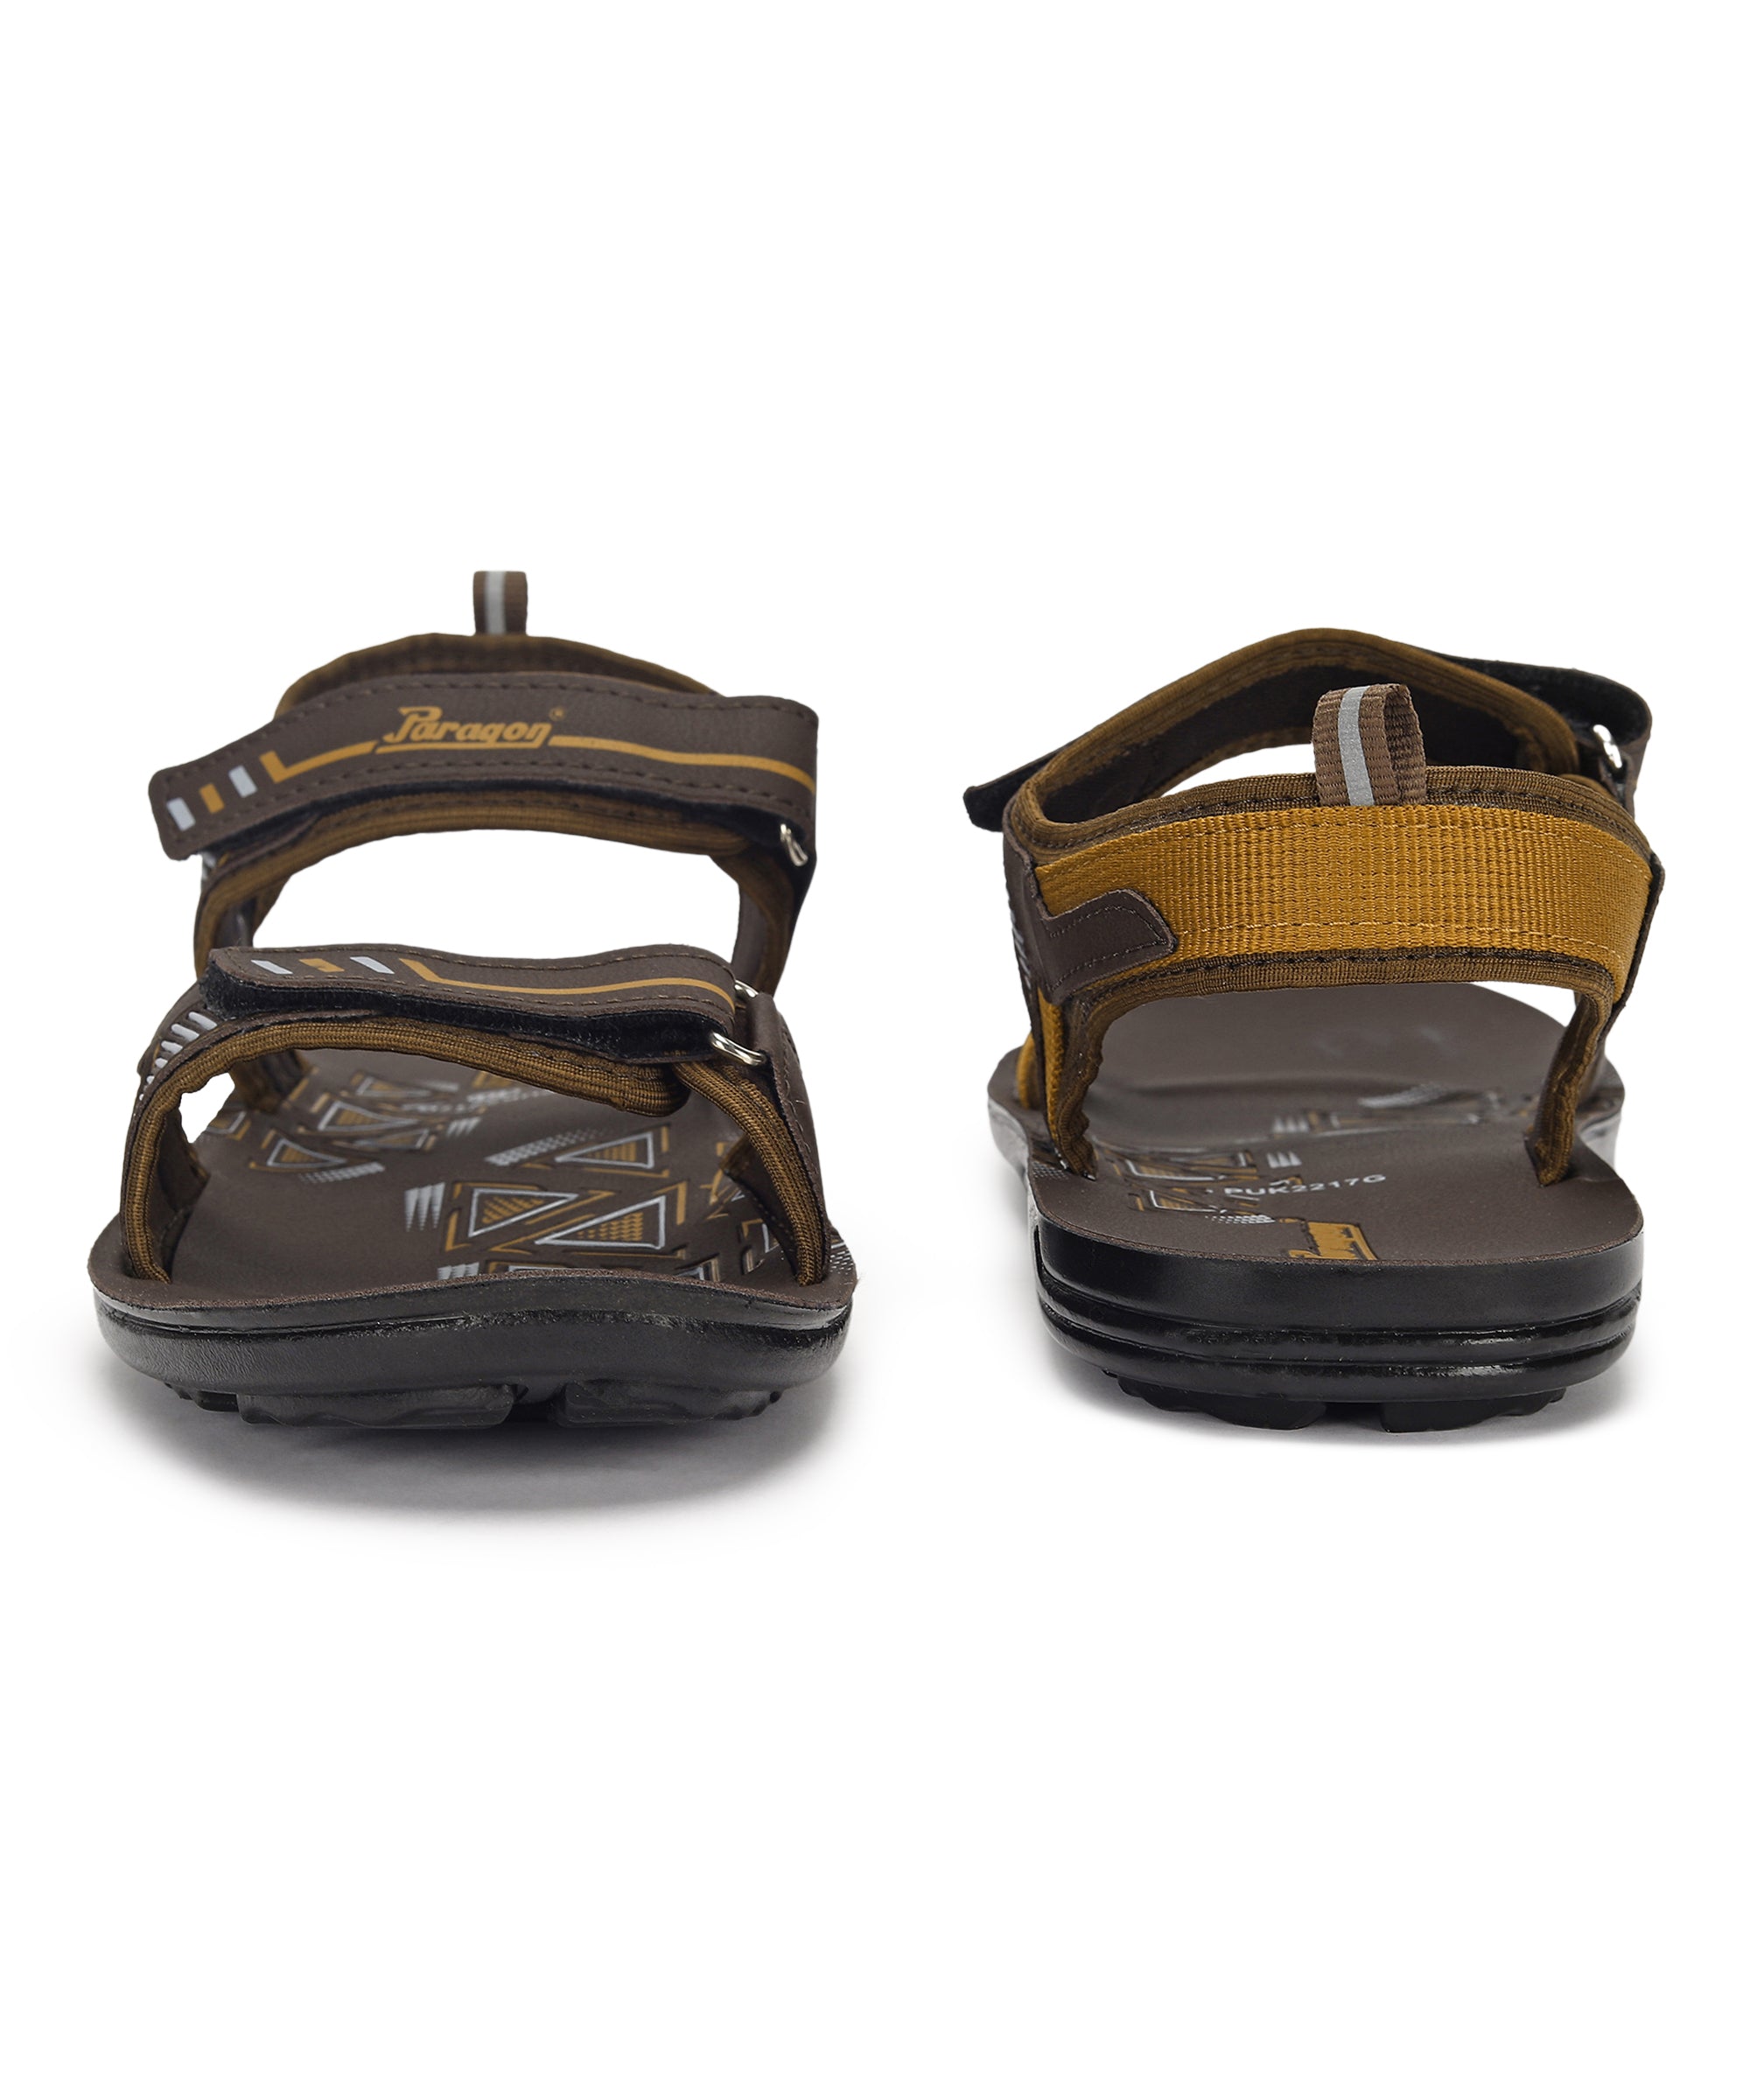 Paragon PUK2217G Men Stylish Velcro Sandals | Comfortable Sporty Sandals for Daily Outdoor Use | Casual Athletic Sandals with Cushioned Soles